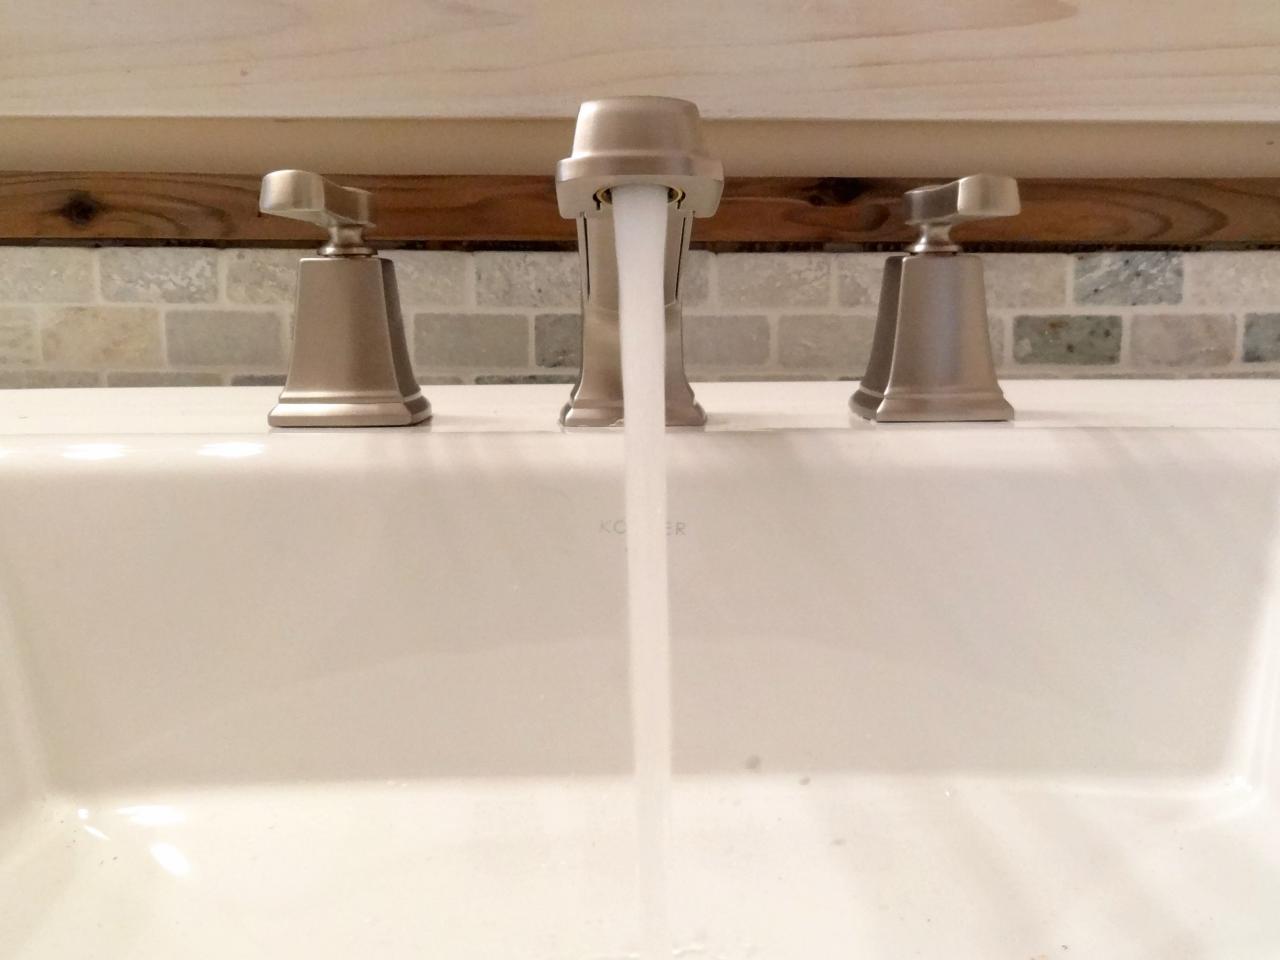 How To Replace A Bathroom Faucet, How To Replace Faucet In The Bathtub